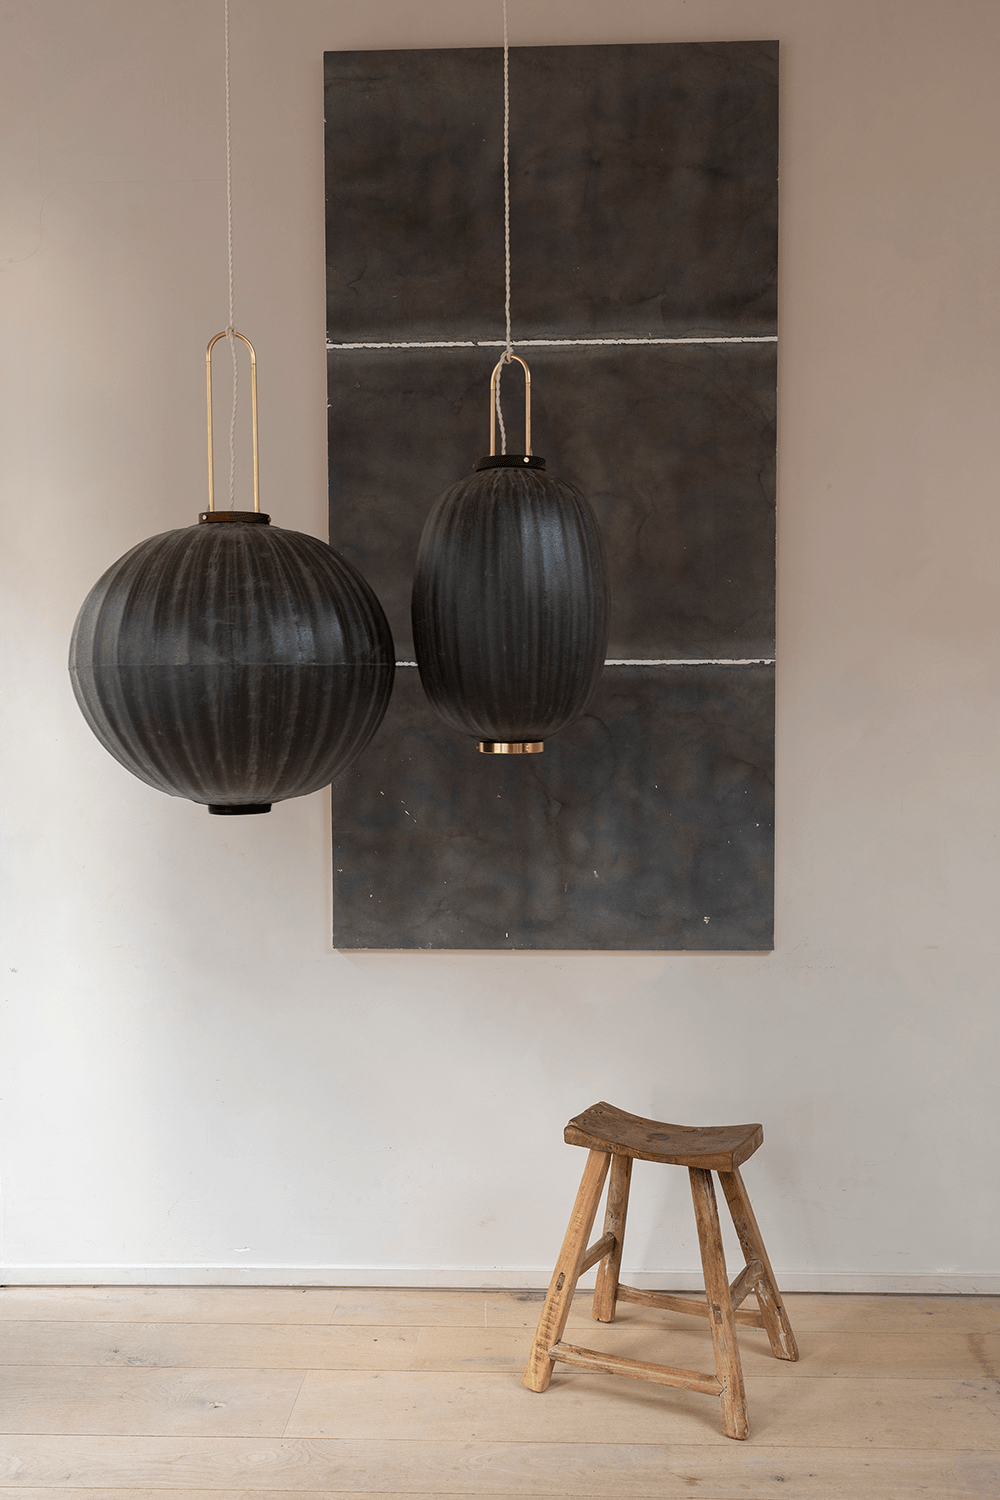 Mandarin shape and Oval shape Taiwan Lanterns hanging in front of a painting with a wooden stool.